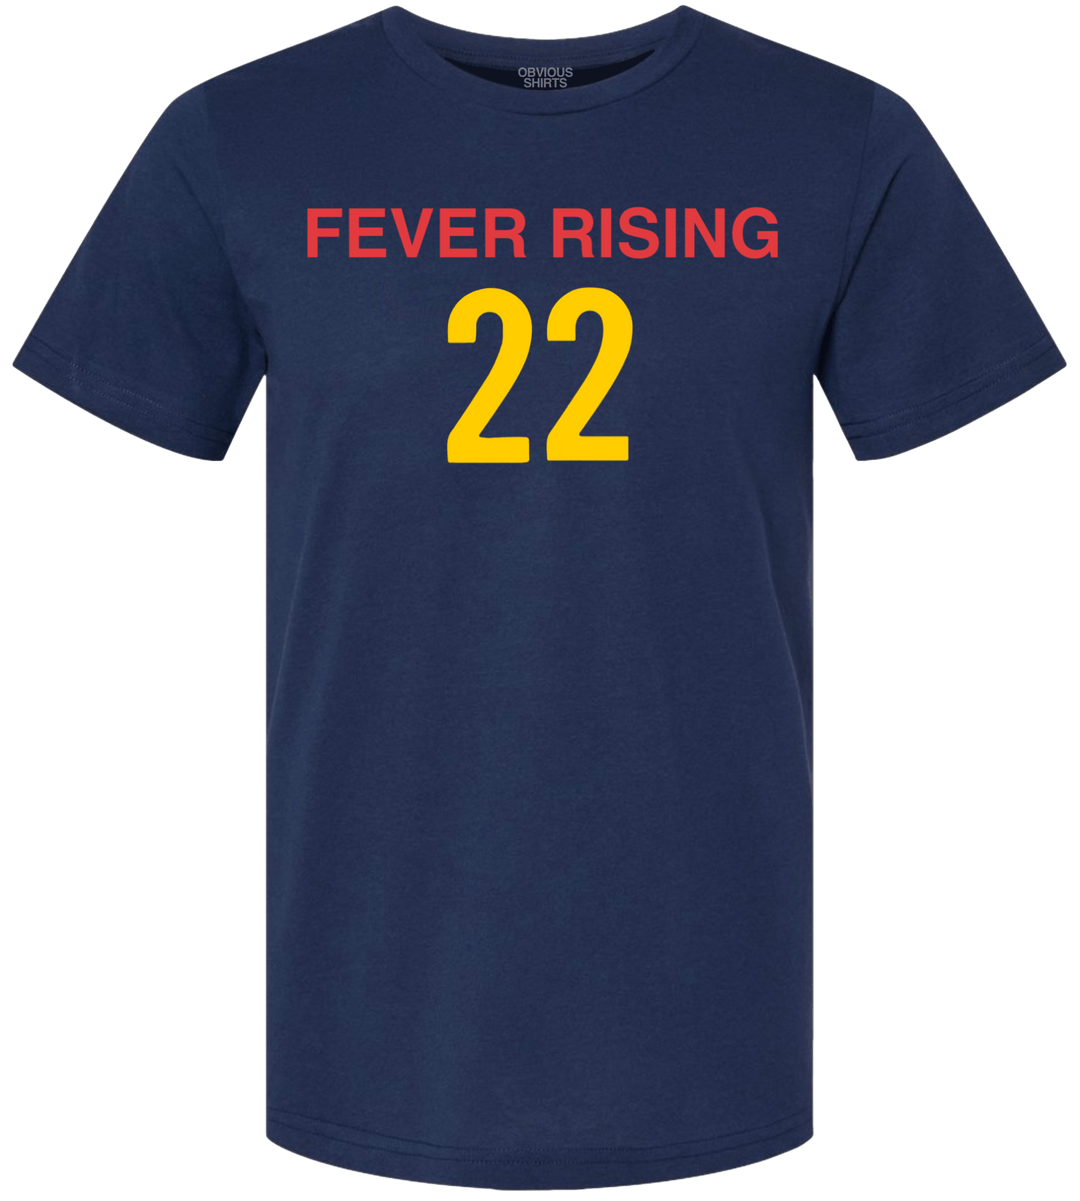 FEVER RISING 22. - OBVIOUS SHIRTS